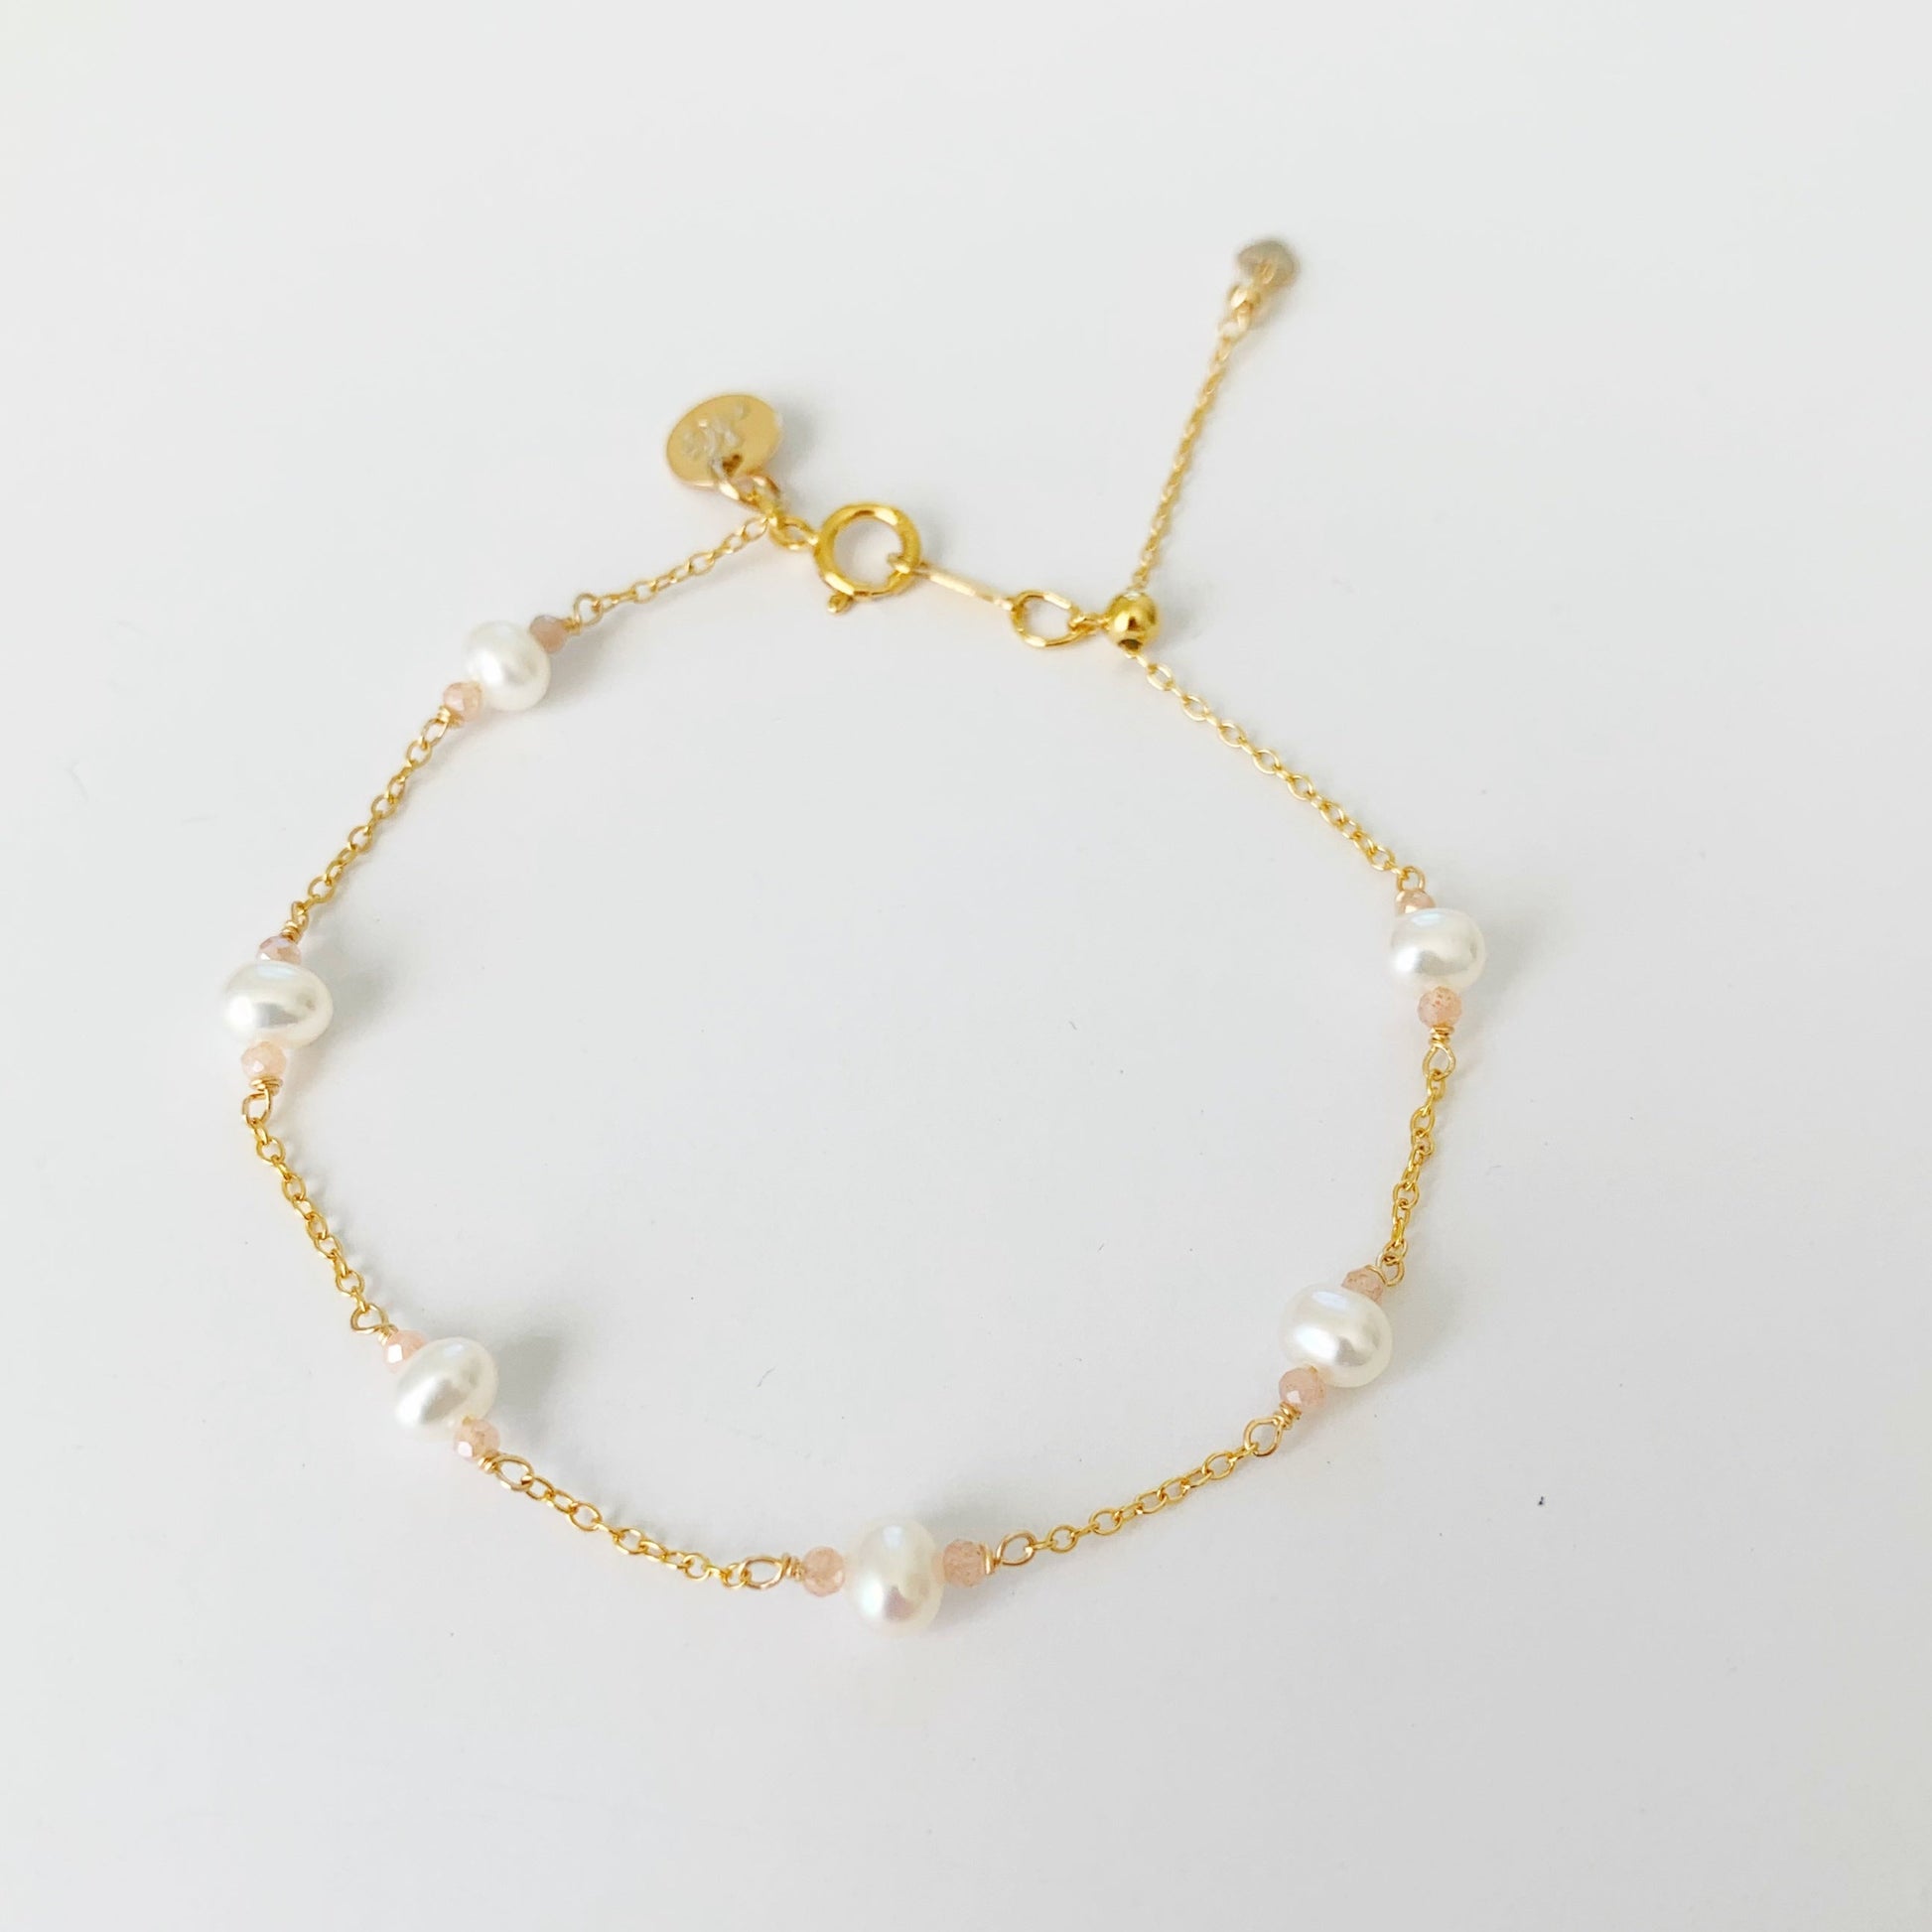 A top view of the barrington bracelet on a white surface